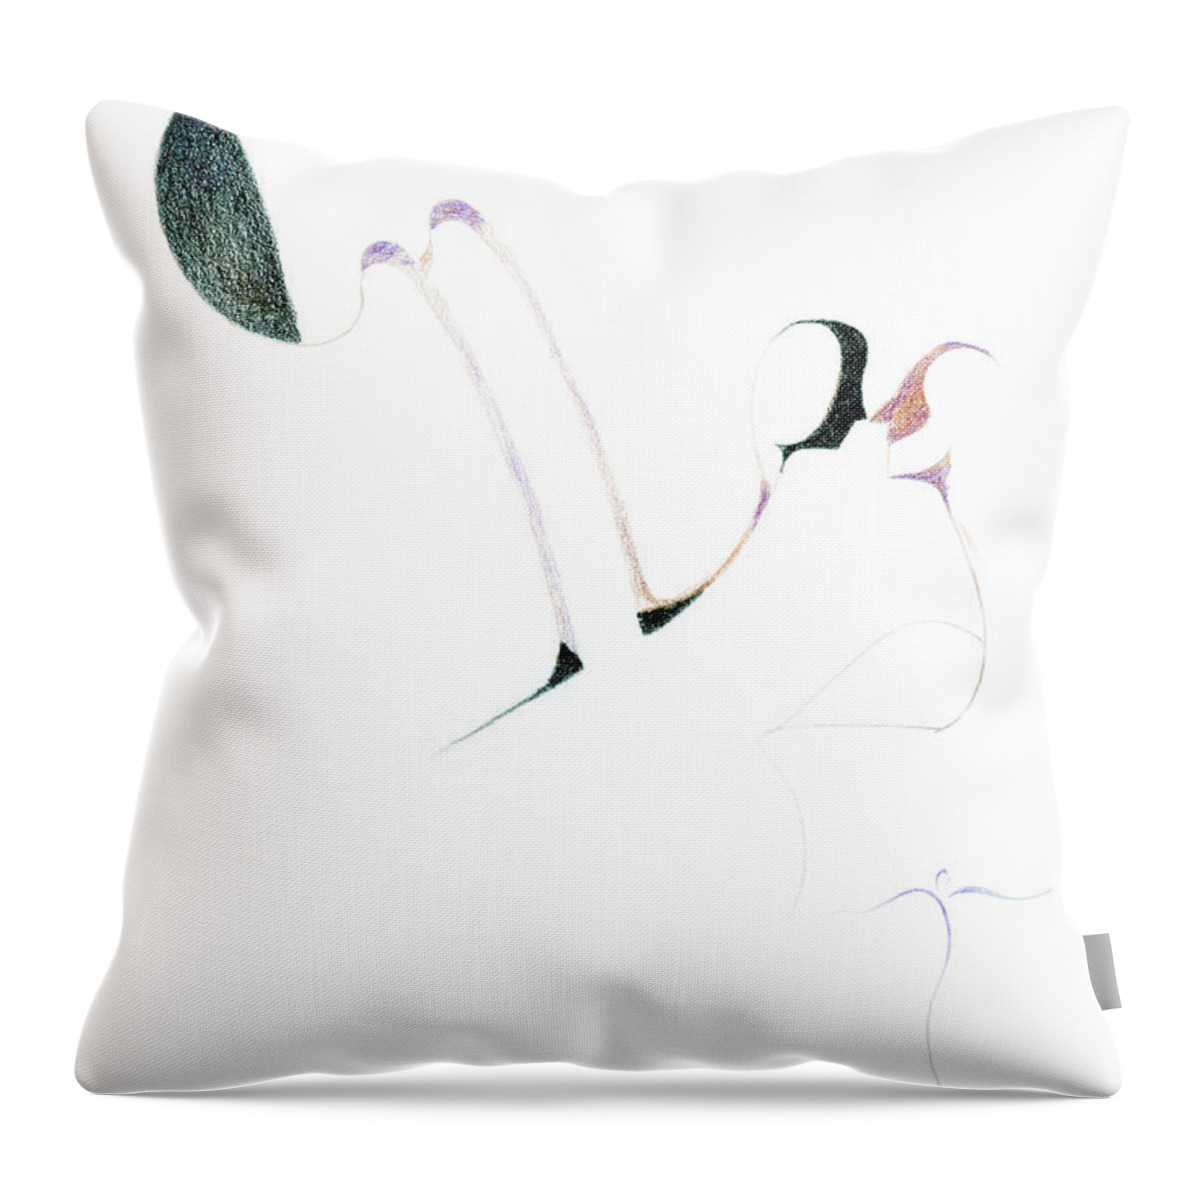  Throw Pillow featuring the drawing Wings by James Lanigan Thompson MFA